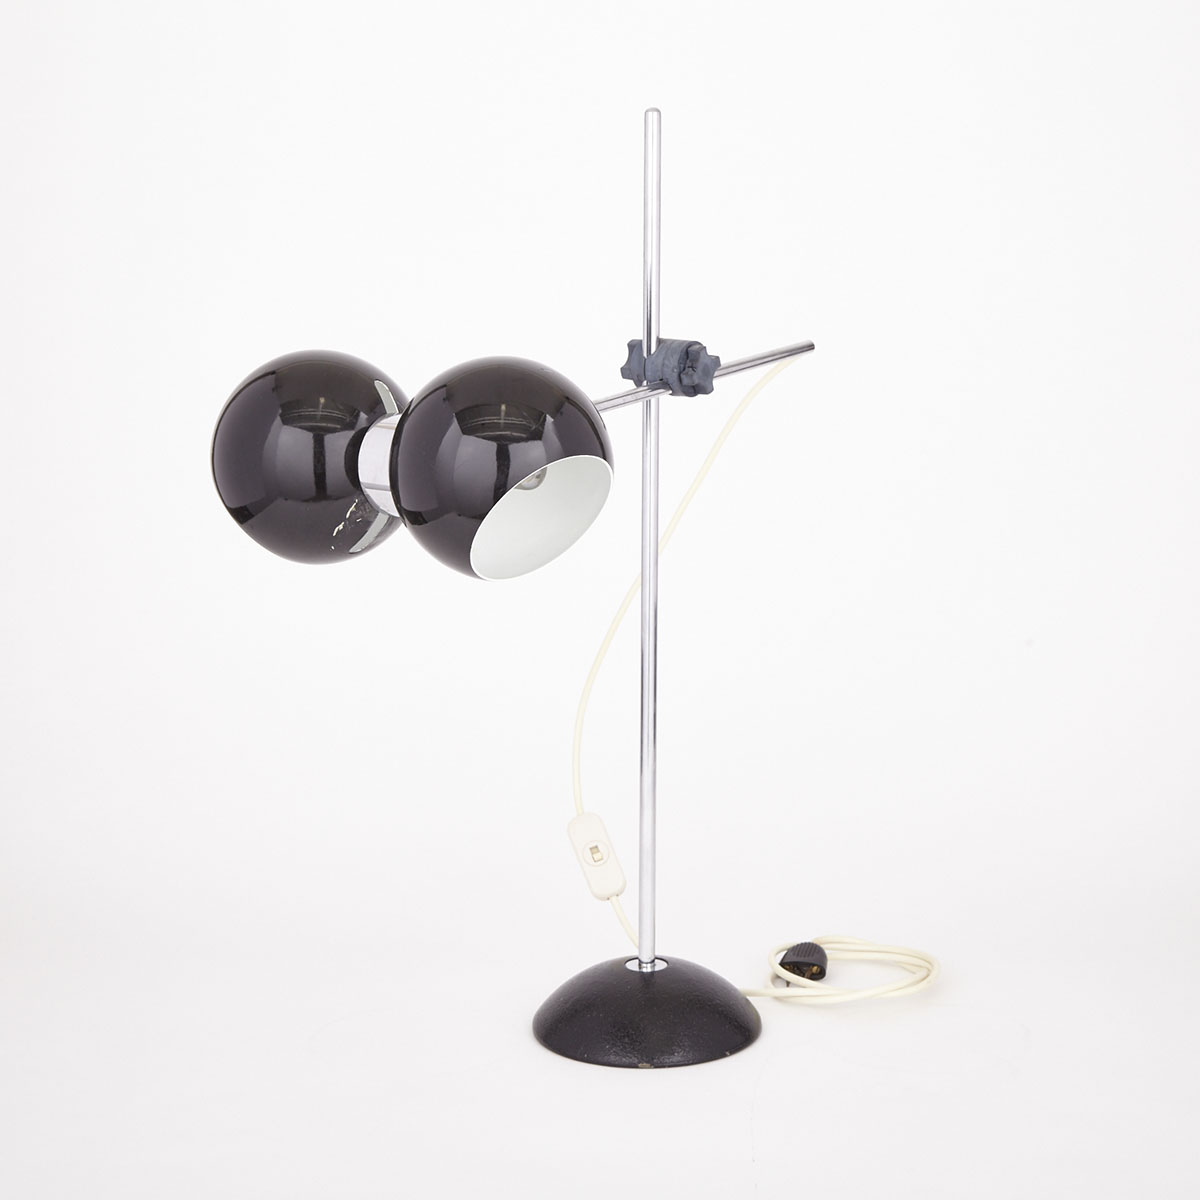 Valenti & Co. Black Lacquered and Chrome  Desk Lamp, Italy, mid 20th century